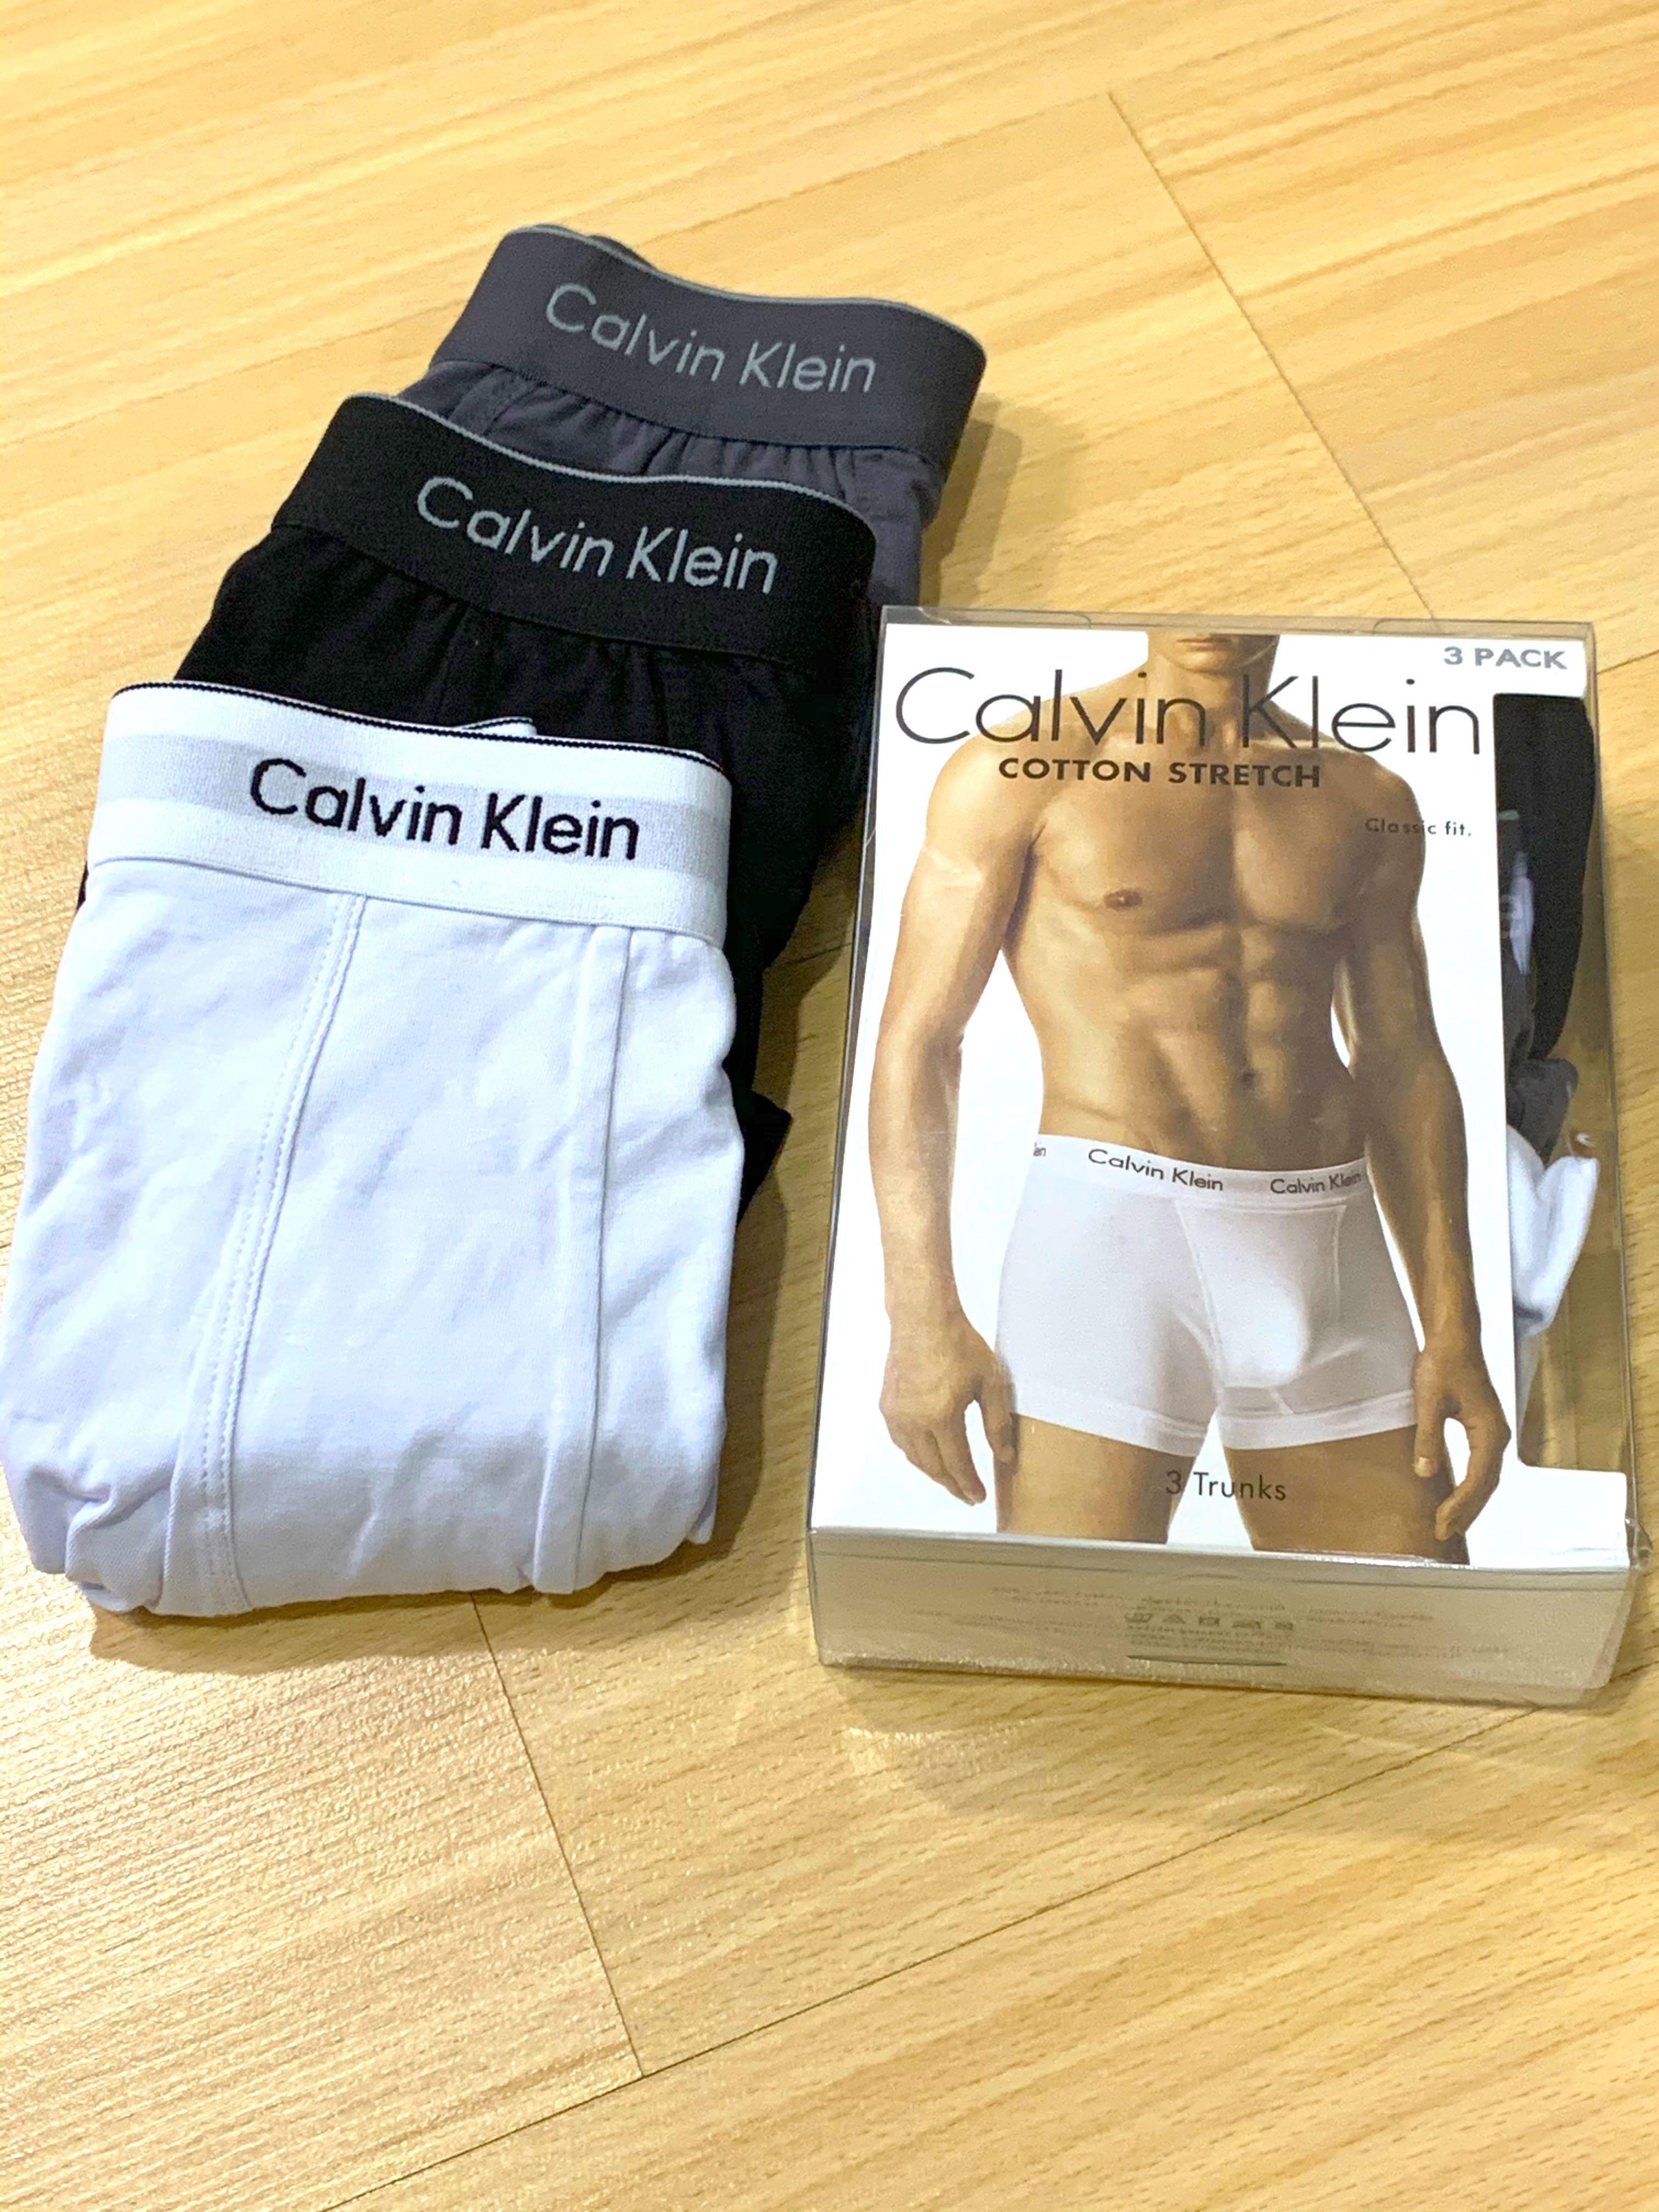 Sale! CK men short brief boxer set! All sizes available!, Men's Fashion,  Bottoms, New Underwear on Carousell